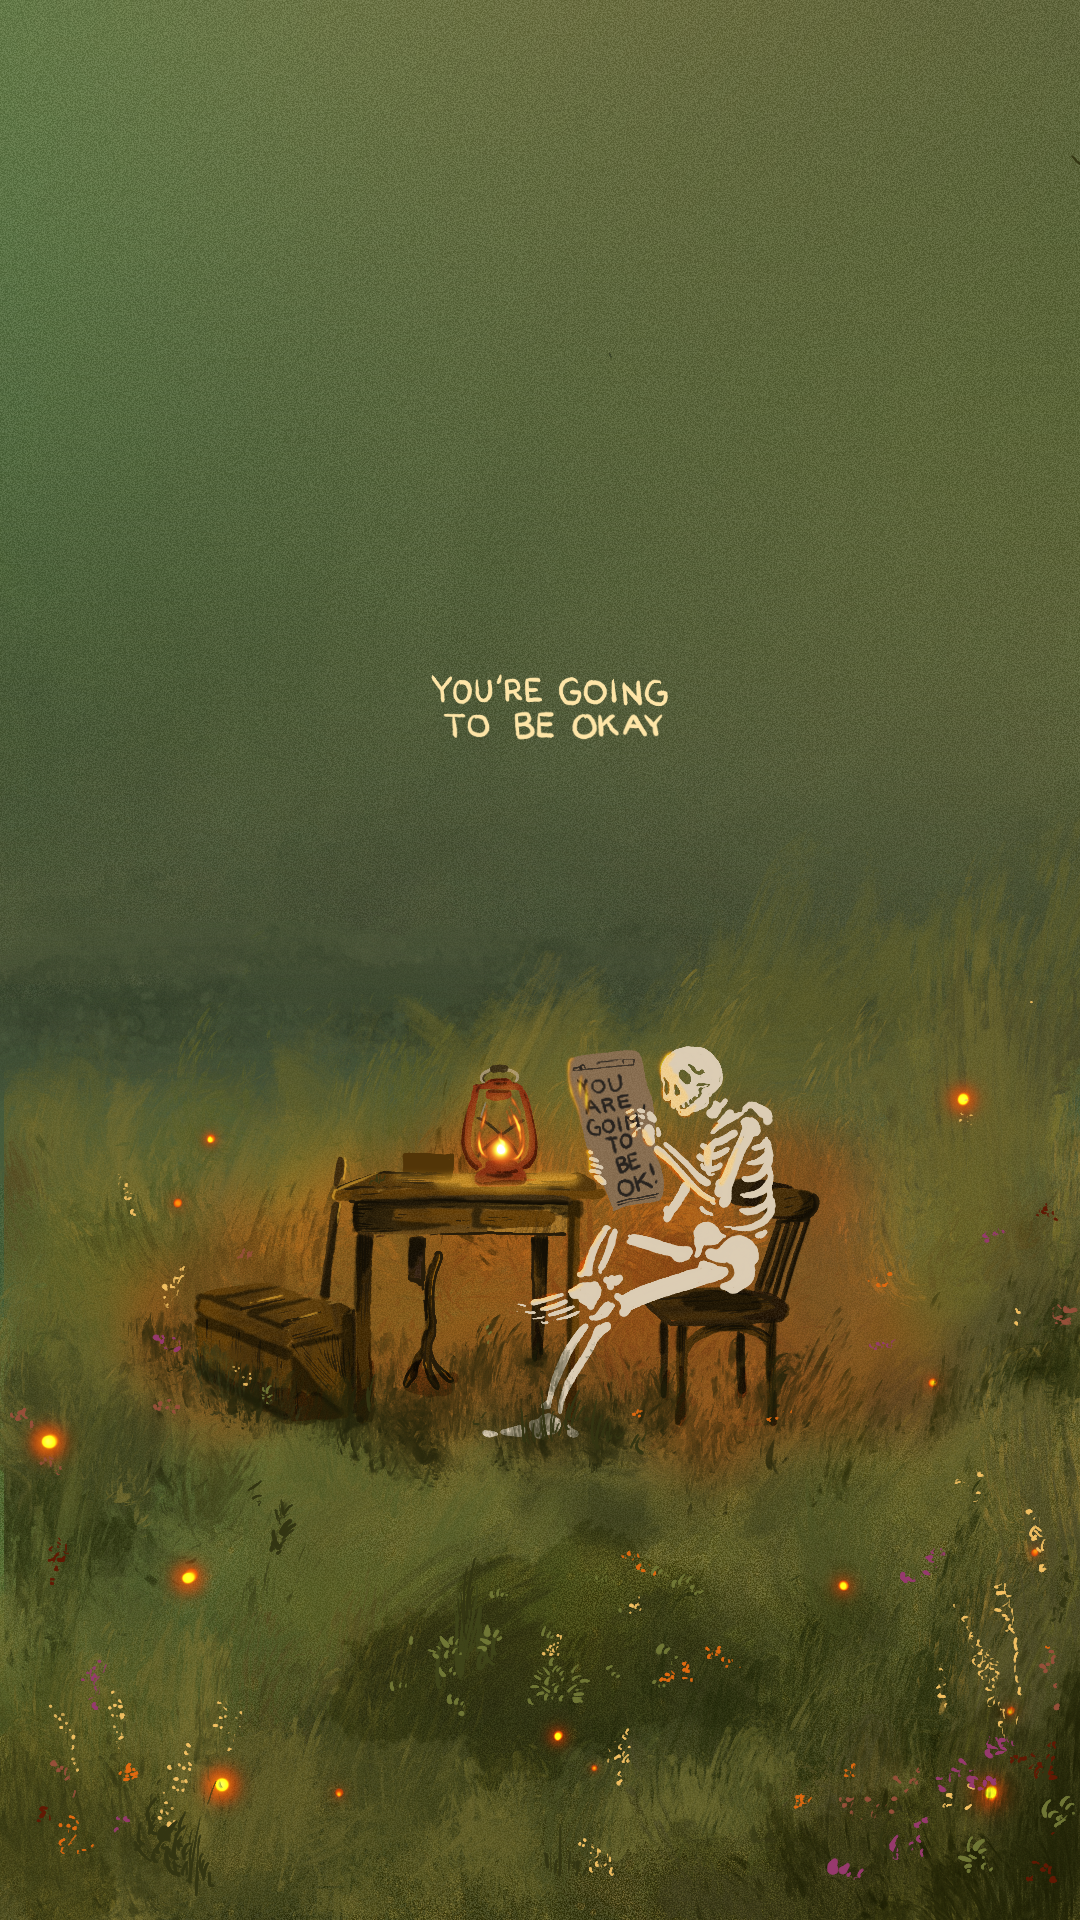 You're going to be okay!